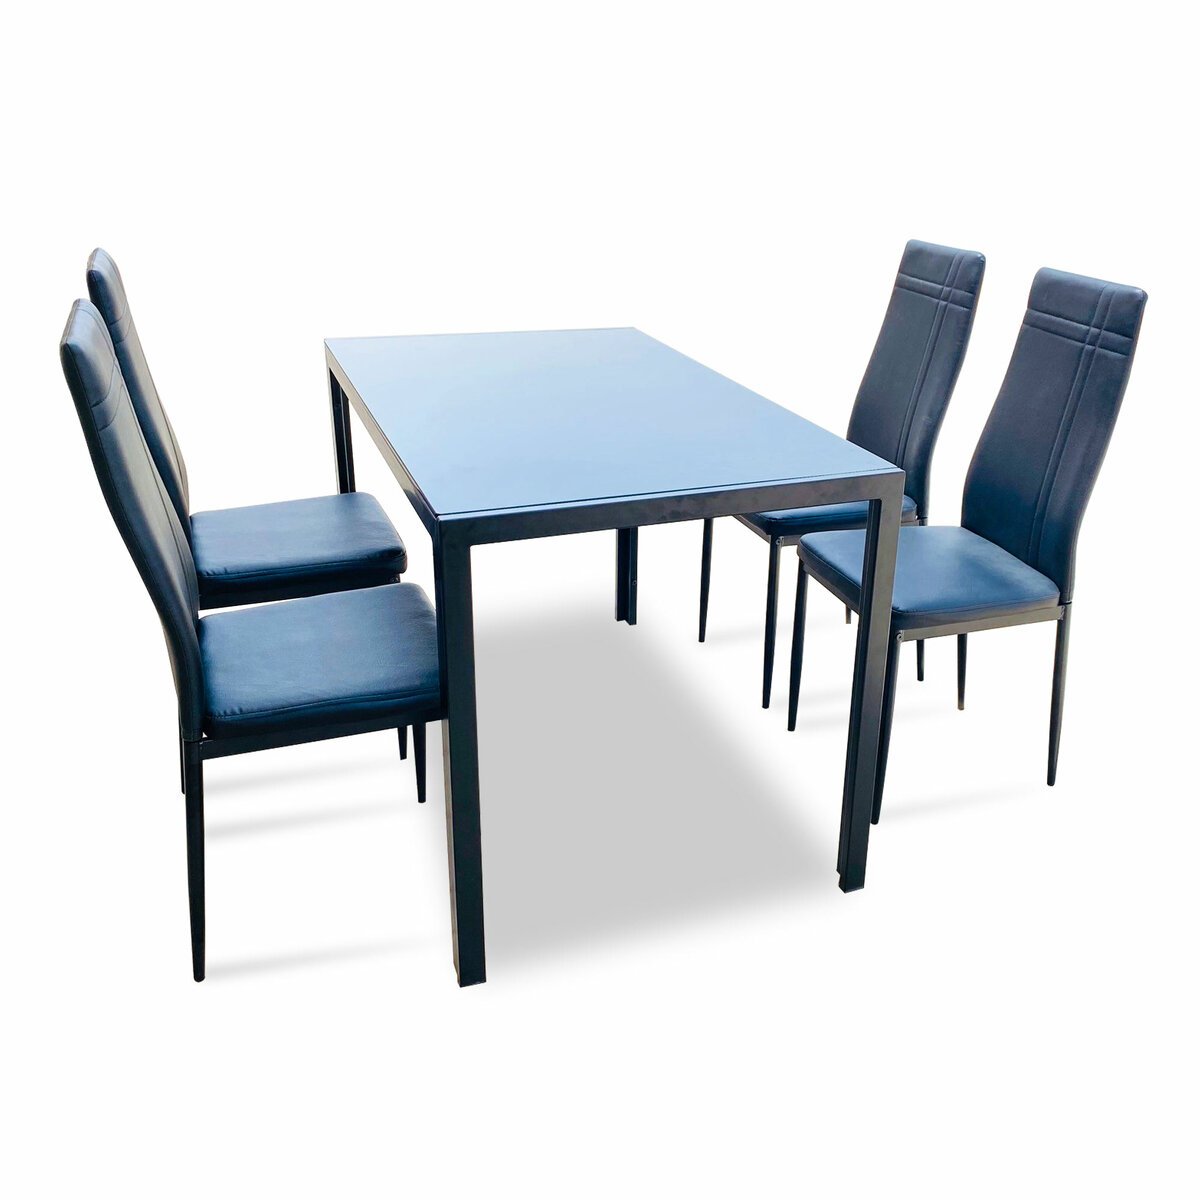 Maple Leaf Glass-DinigTable With 4 Chairs DA-258E